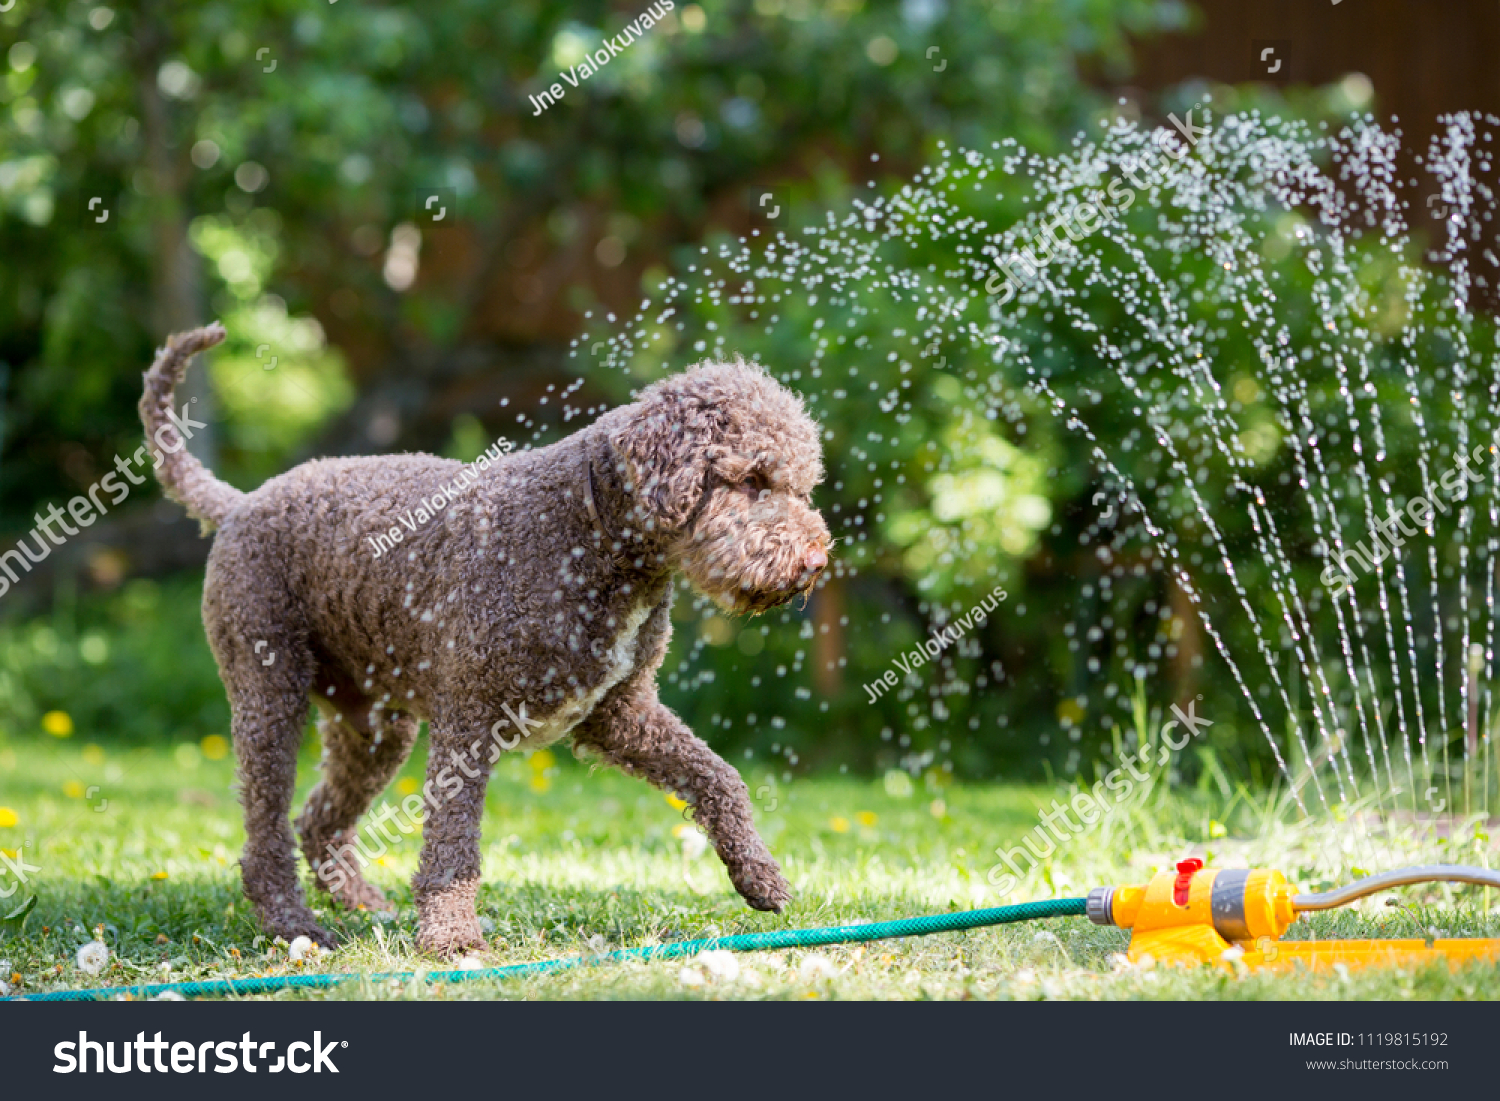 Brown dog is playing with a water sprinkler outdoors on a hot summer day. The dog is cooling itself. #1119815192